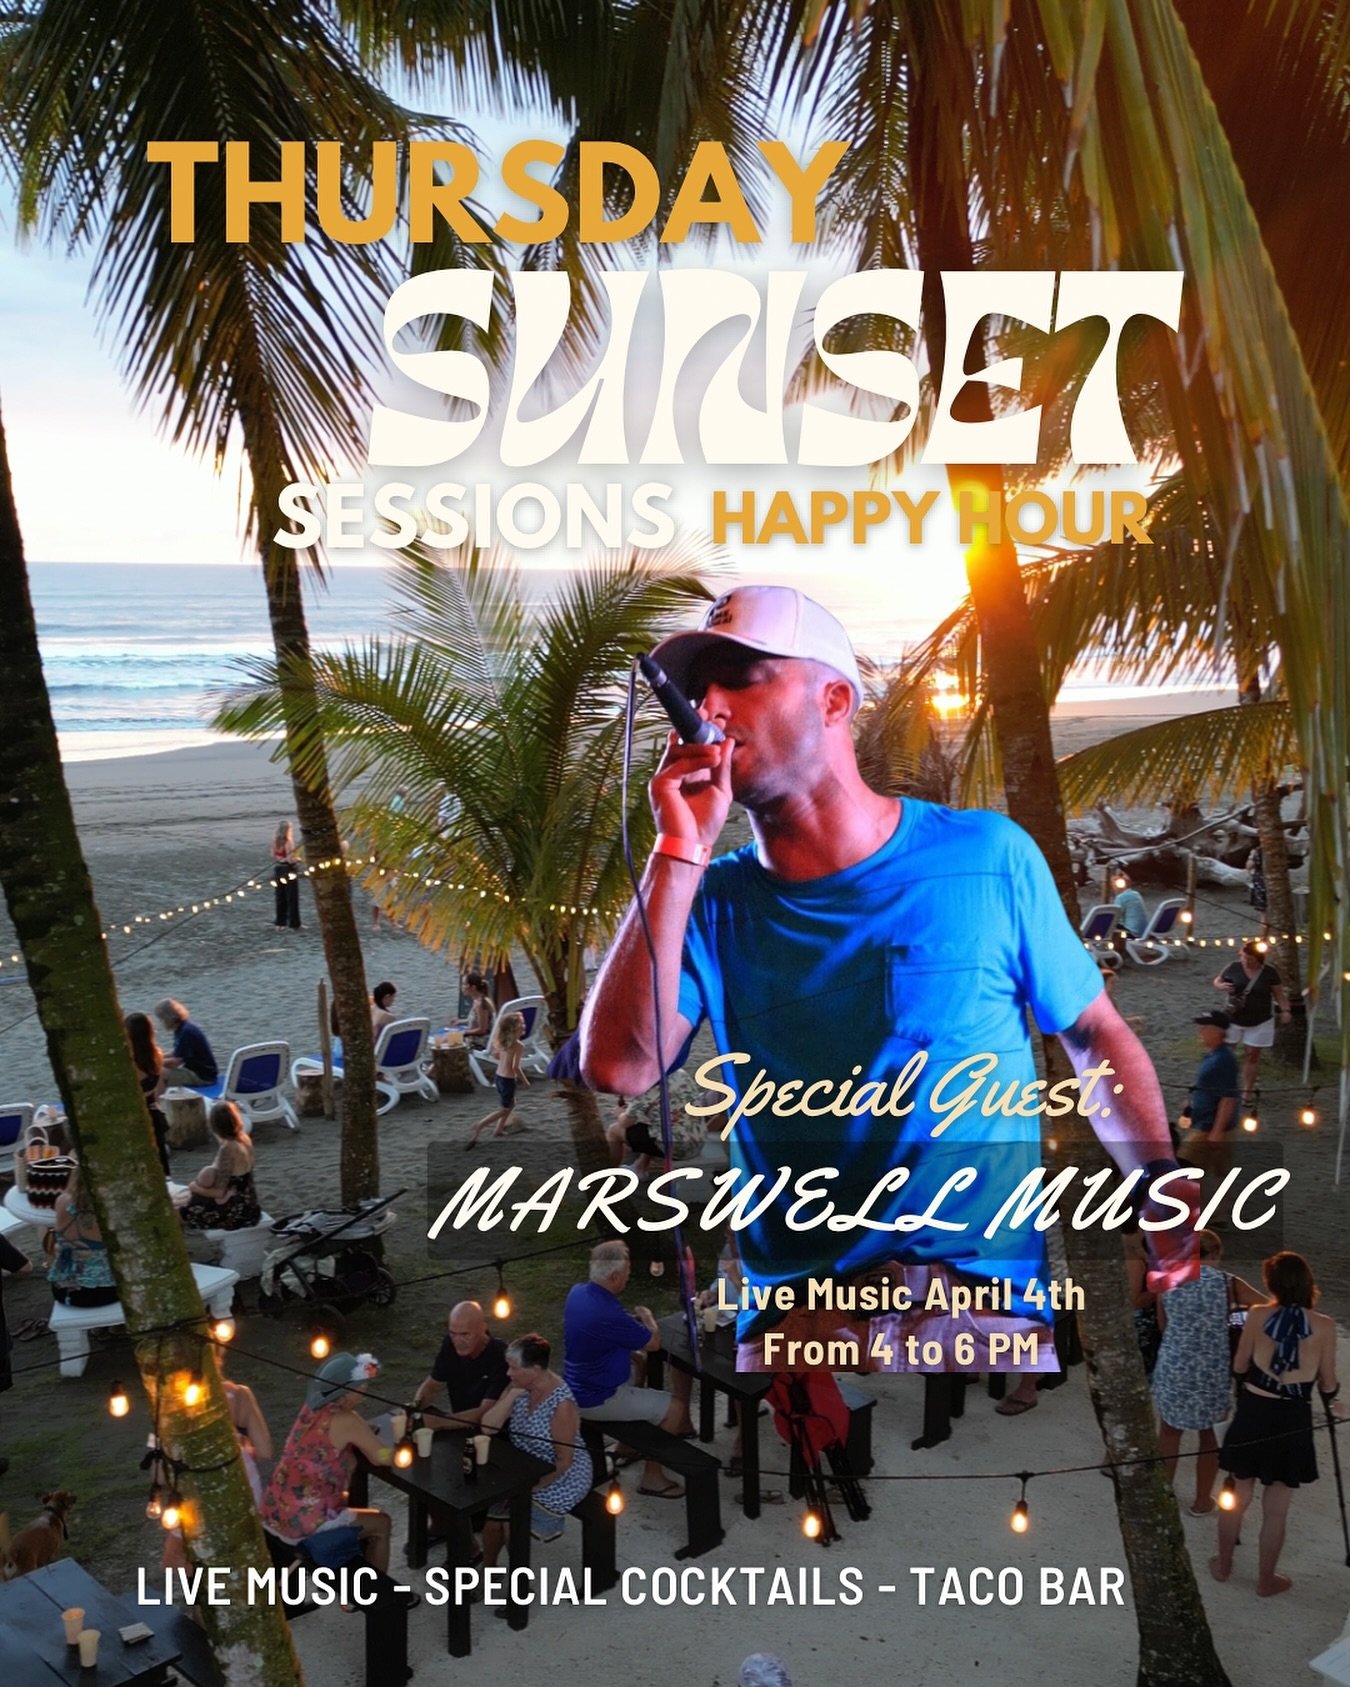 Don&rsquo;t miss our Thursday Sunset Sessions Happy Hour! 

Join us this Thursday April 4th  from 4 to 6pm for an evening of lively music by @marswell_music , along with our special and tasty cocktails, the taco bar you love, and the magical sunset v